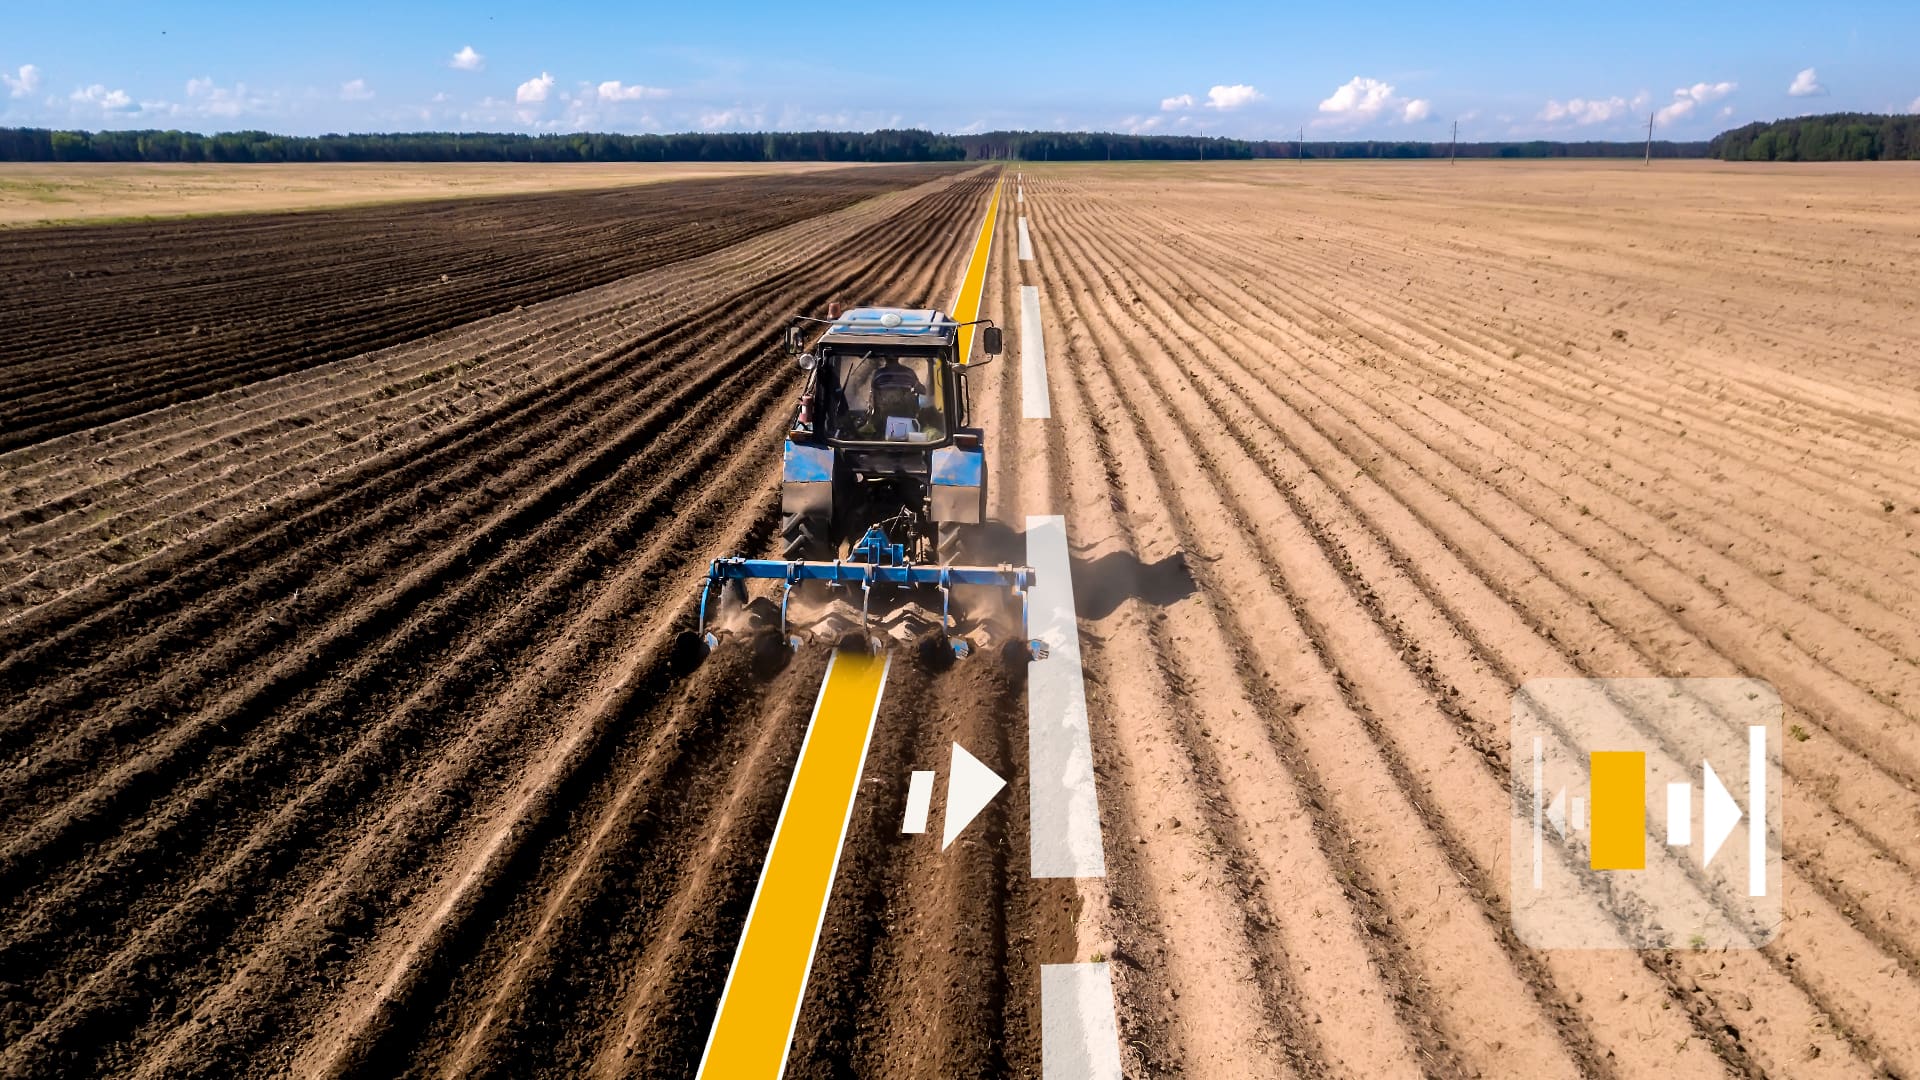 Allow for the adjustment of guidance lines to enhance precision and enables the sharing of these lines between two tractors working in the same field.